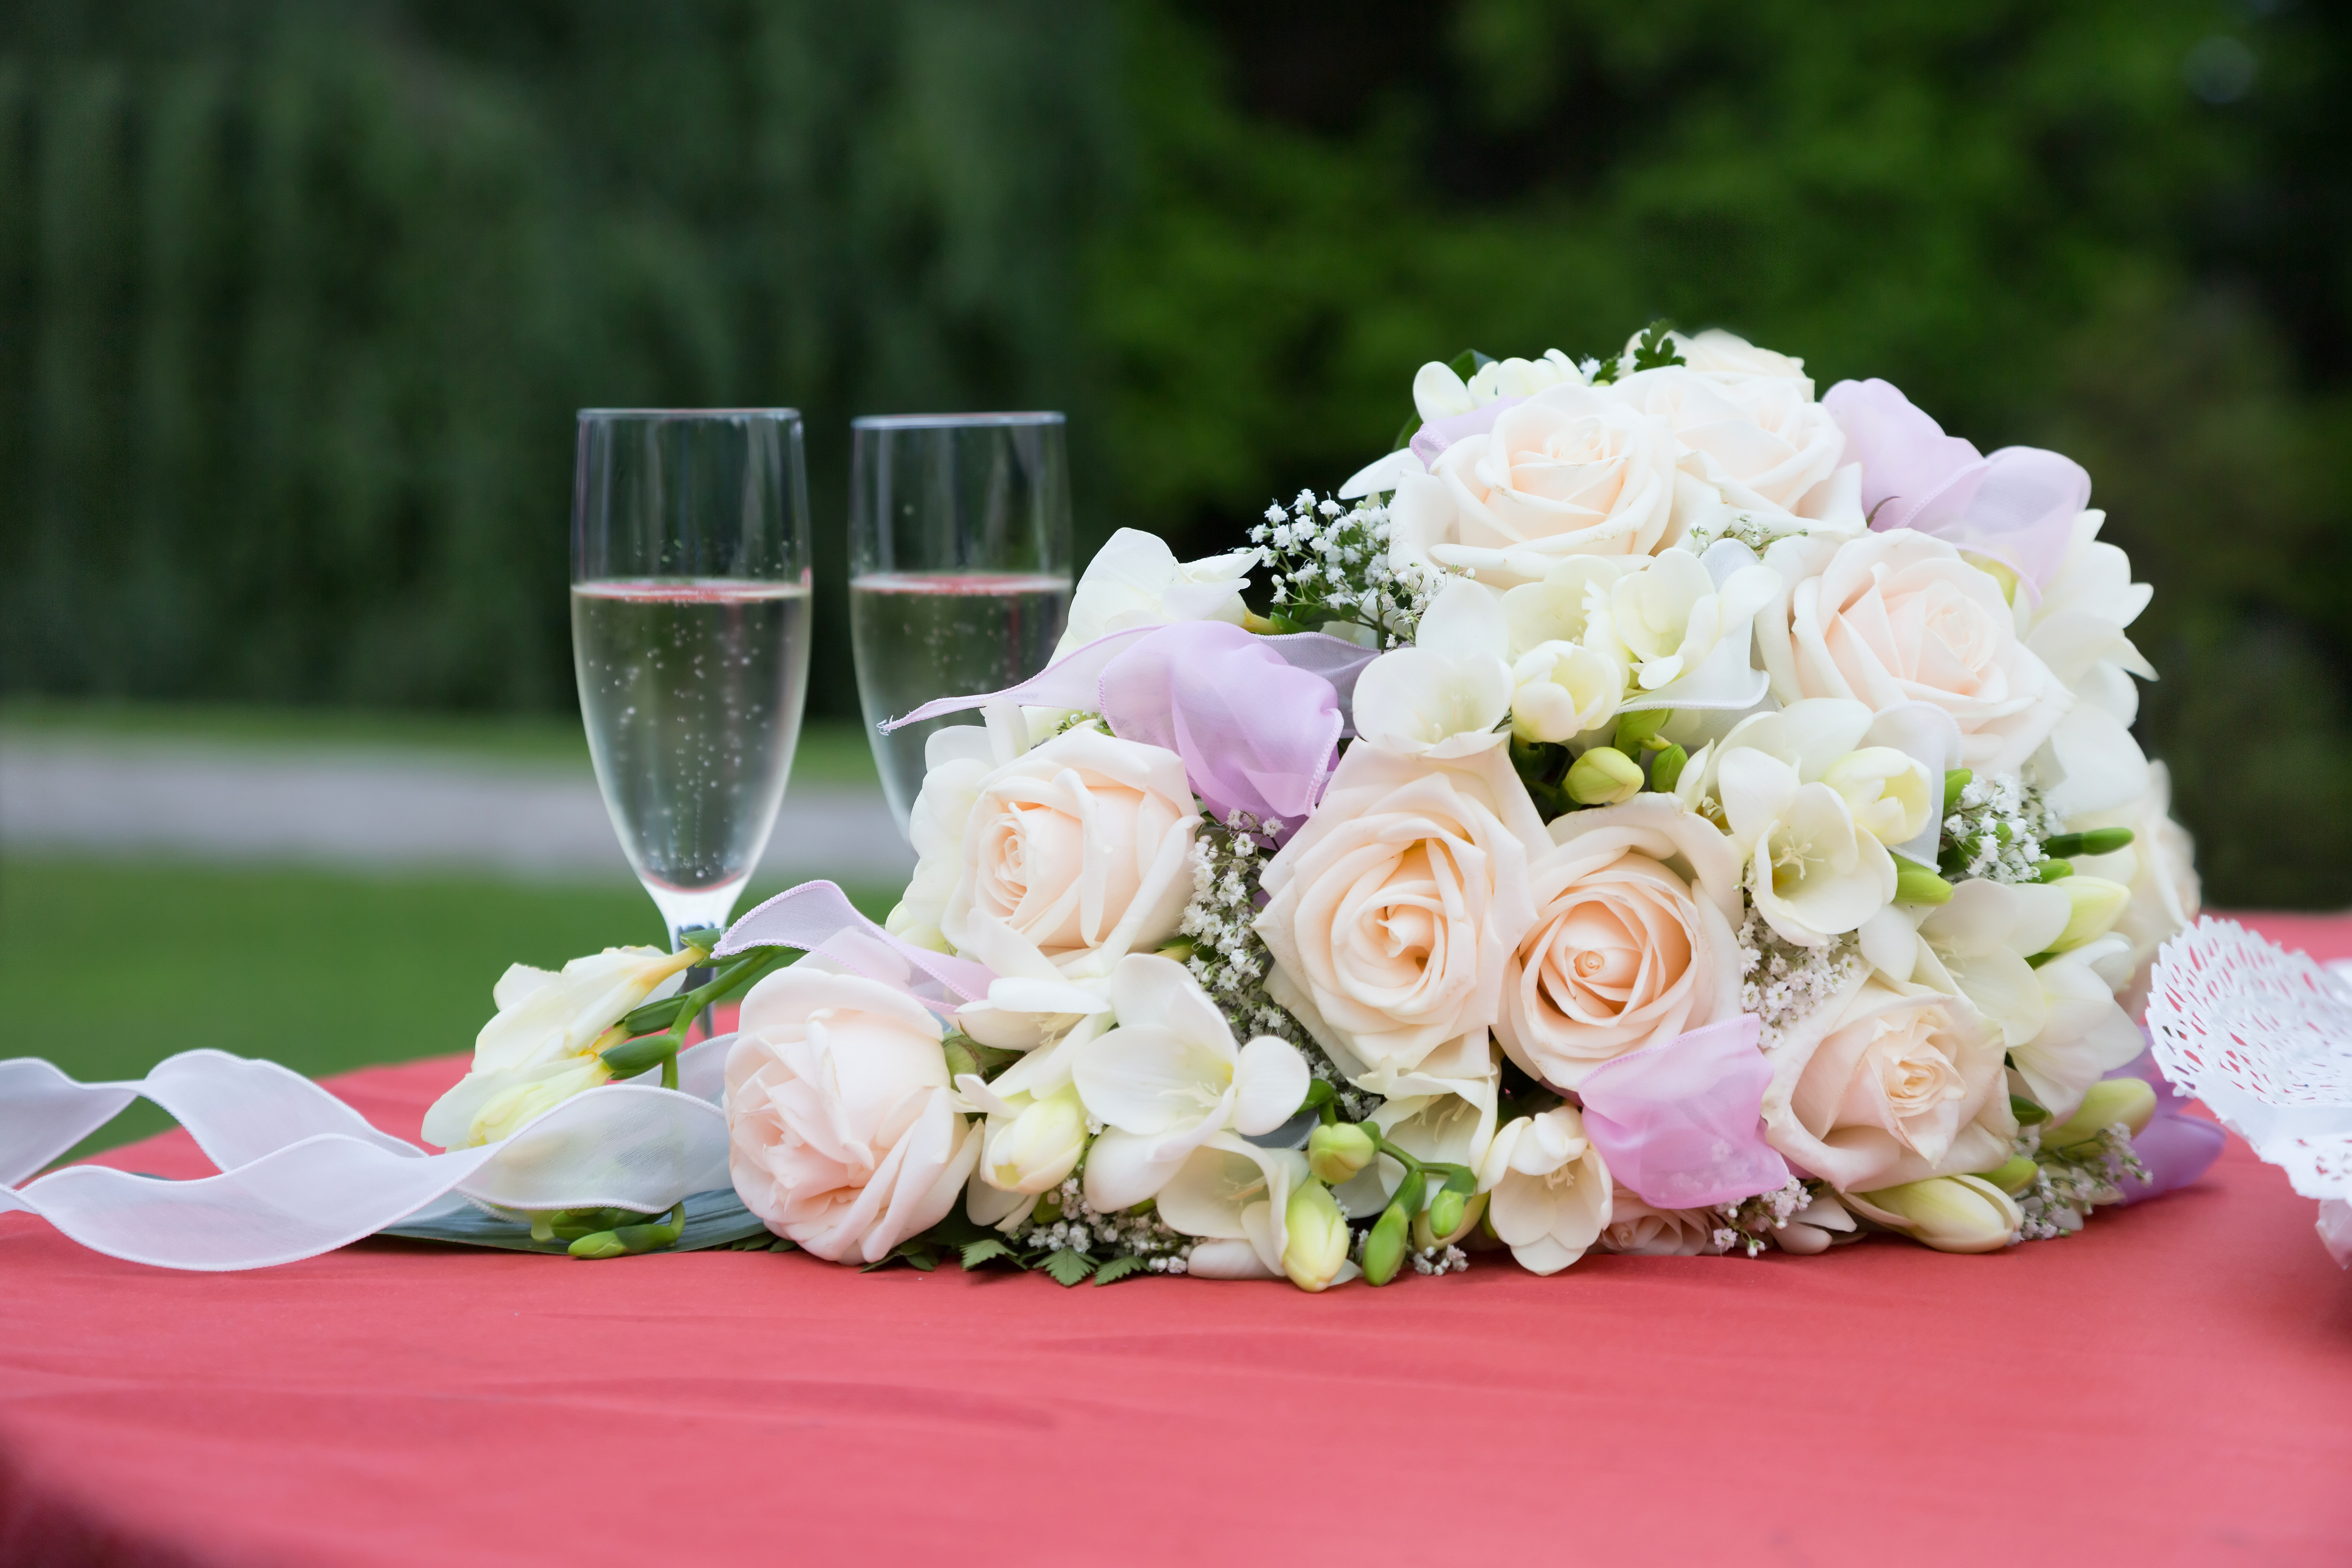 Wedding bouquet and champagne glasses